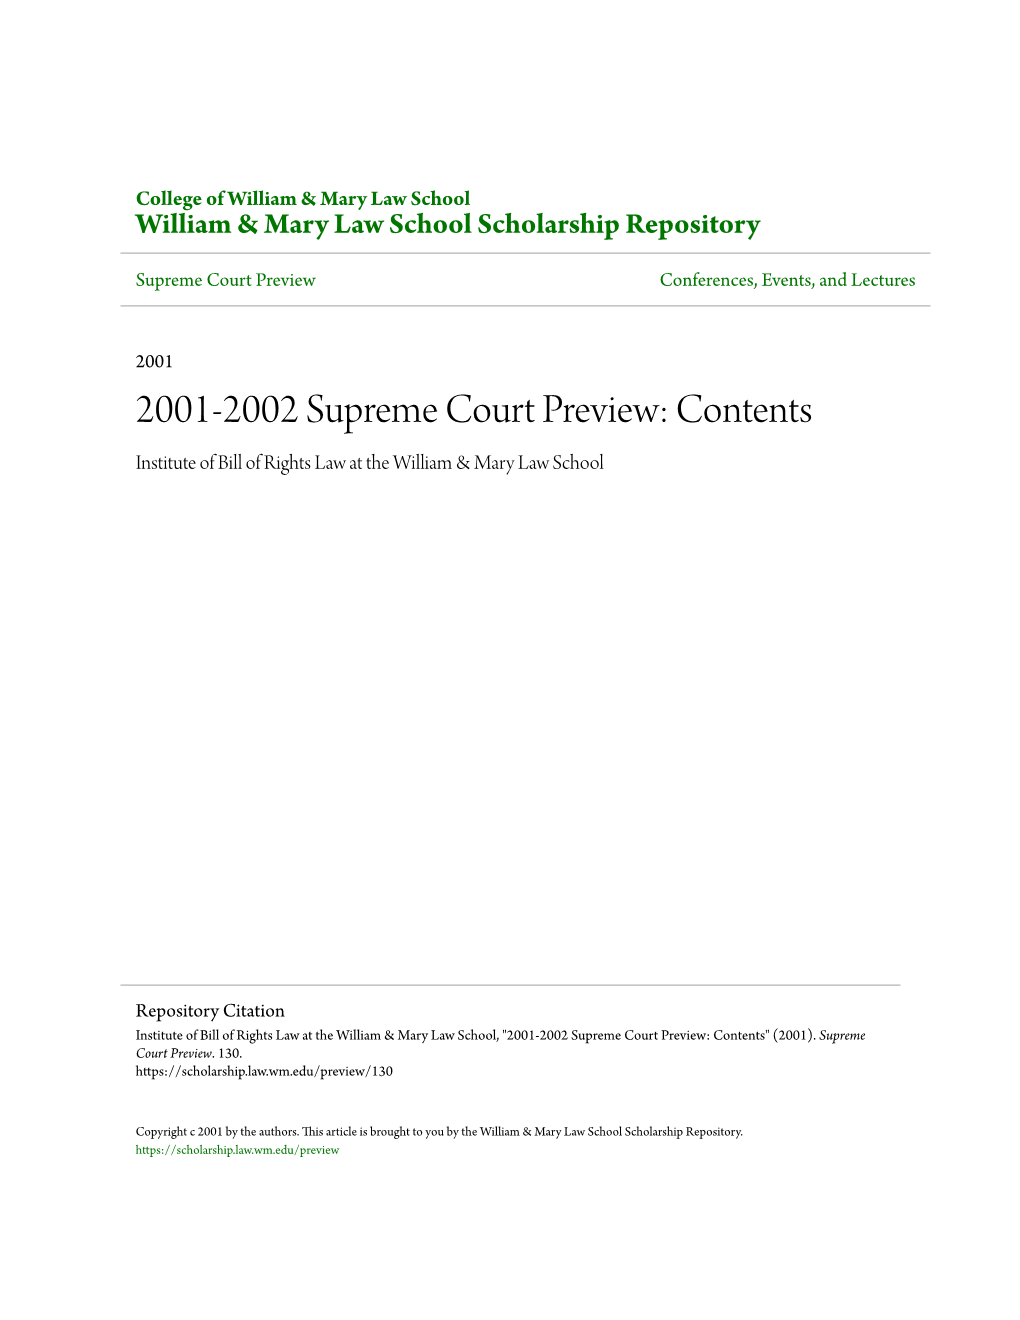 2001-2002 Supreme Court Preview: Contents Institute of Bill of Rights Law at the William & Mary Law School